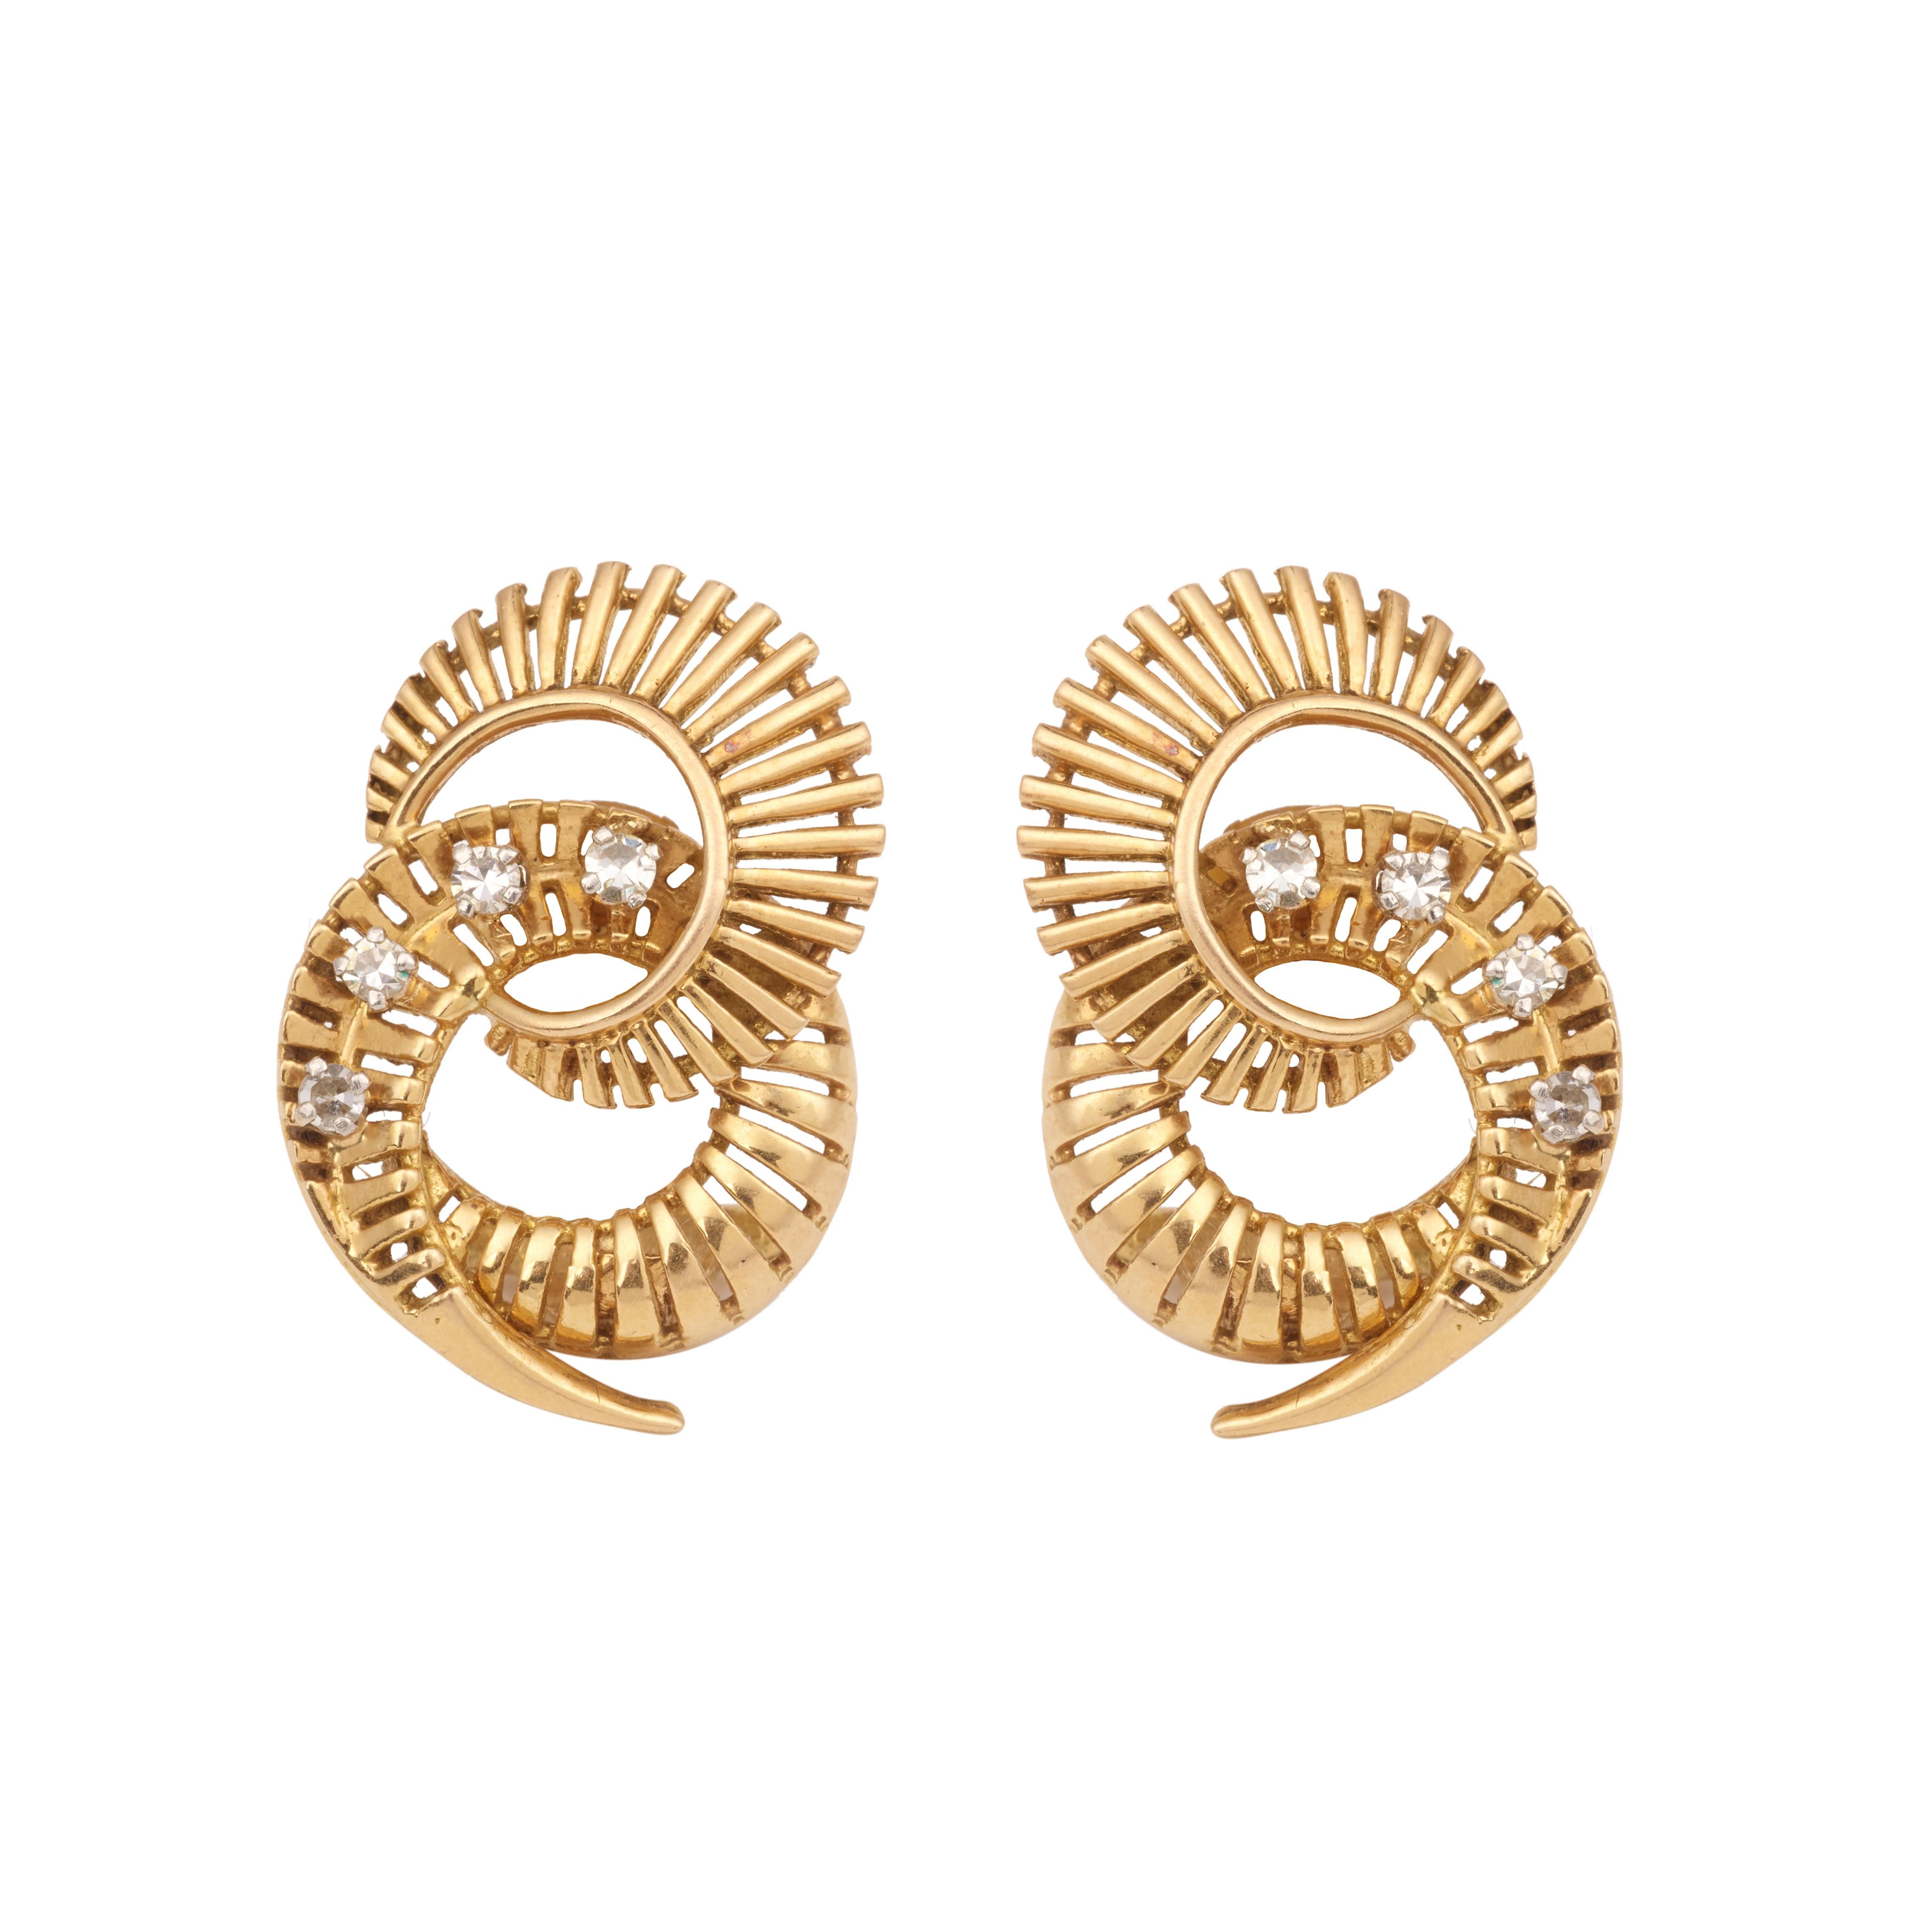 Pair of earrings featuring swirls in yellow gold paved with diamonds.

Earrings modified for pierced ears.

Total estimated weight of diamonds: 0.20 carats

Dimensions : 22.93 x 16.43 x 3.27 mm (0.903 x 0.646 x 0.129 inch)

French work circa